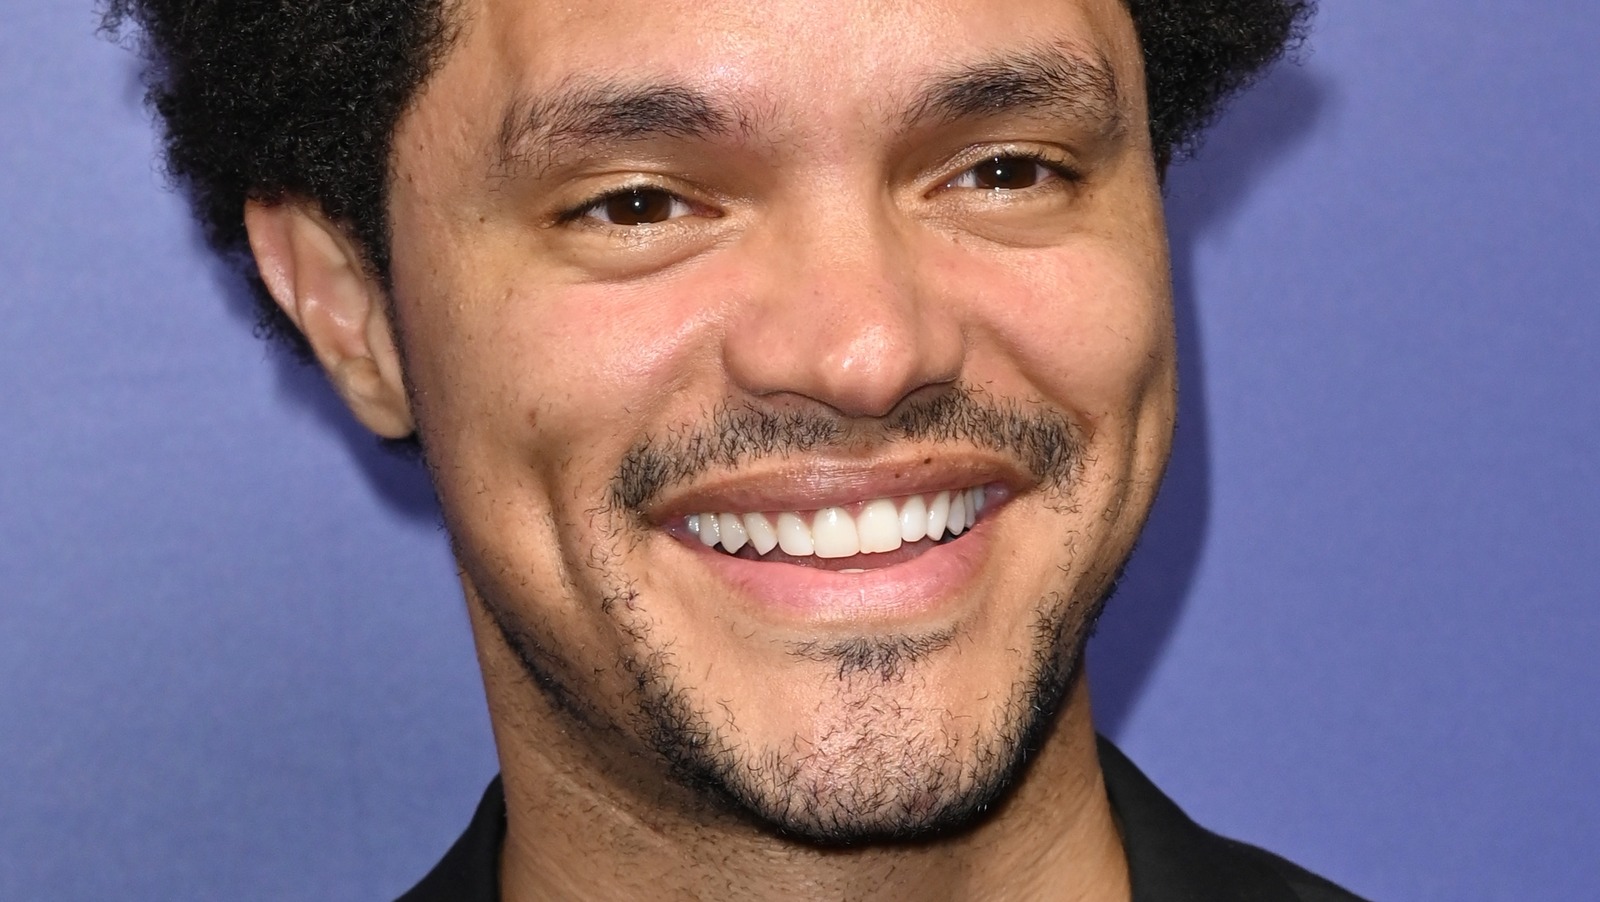 What's Next For Trevor Noah After The Daily Show?